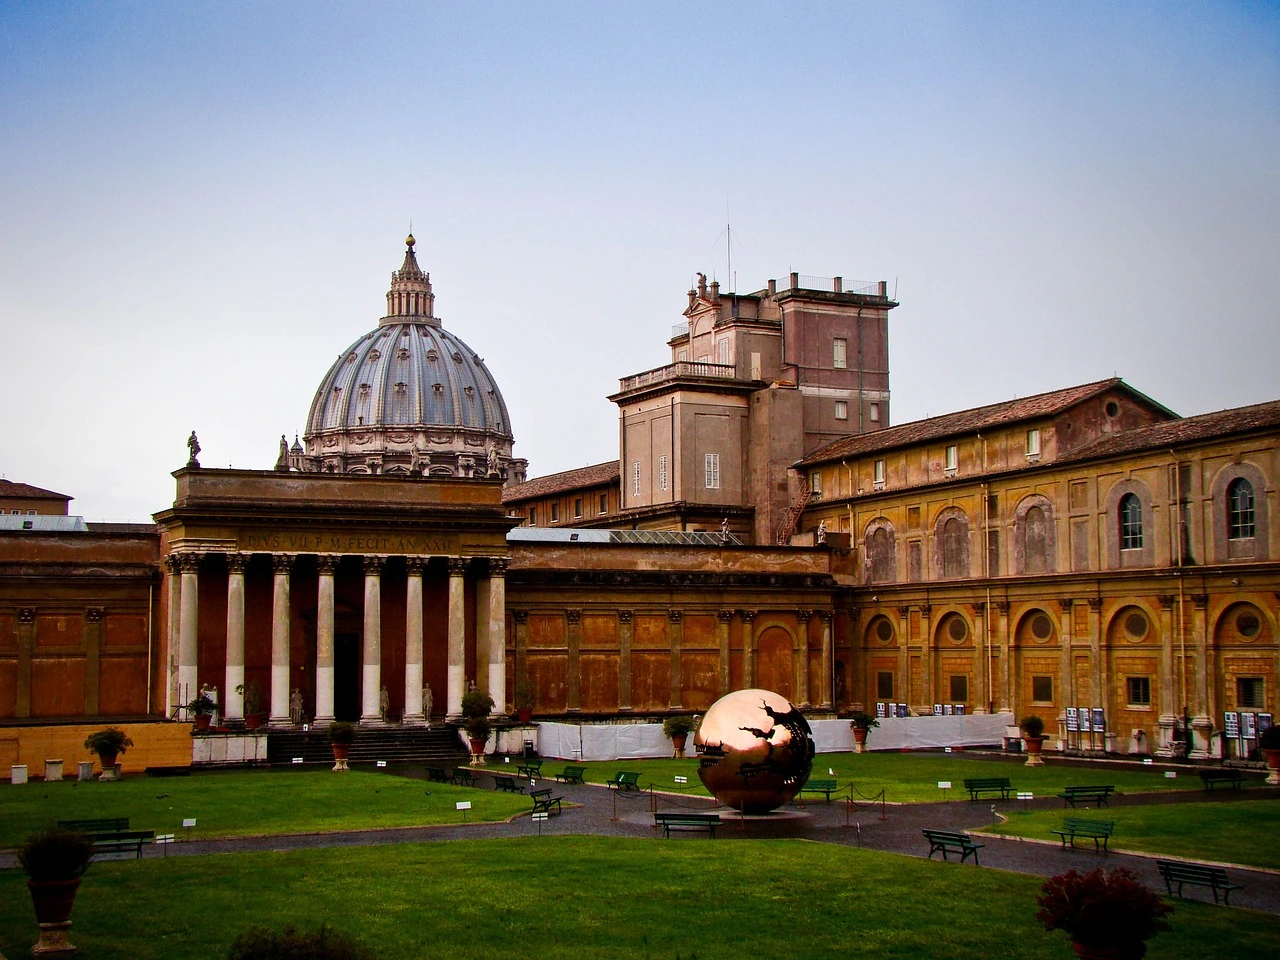 Are there any evening events or special activities at the Vatican Museums?